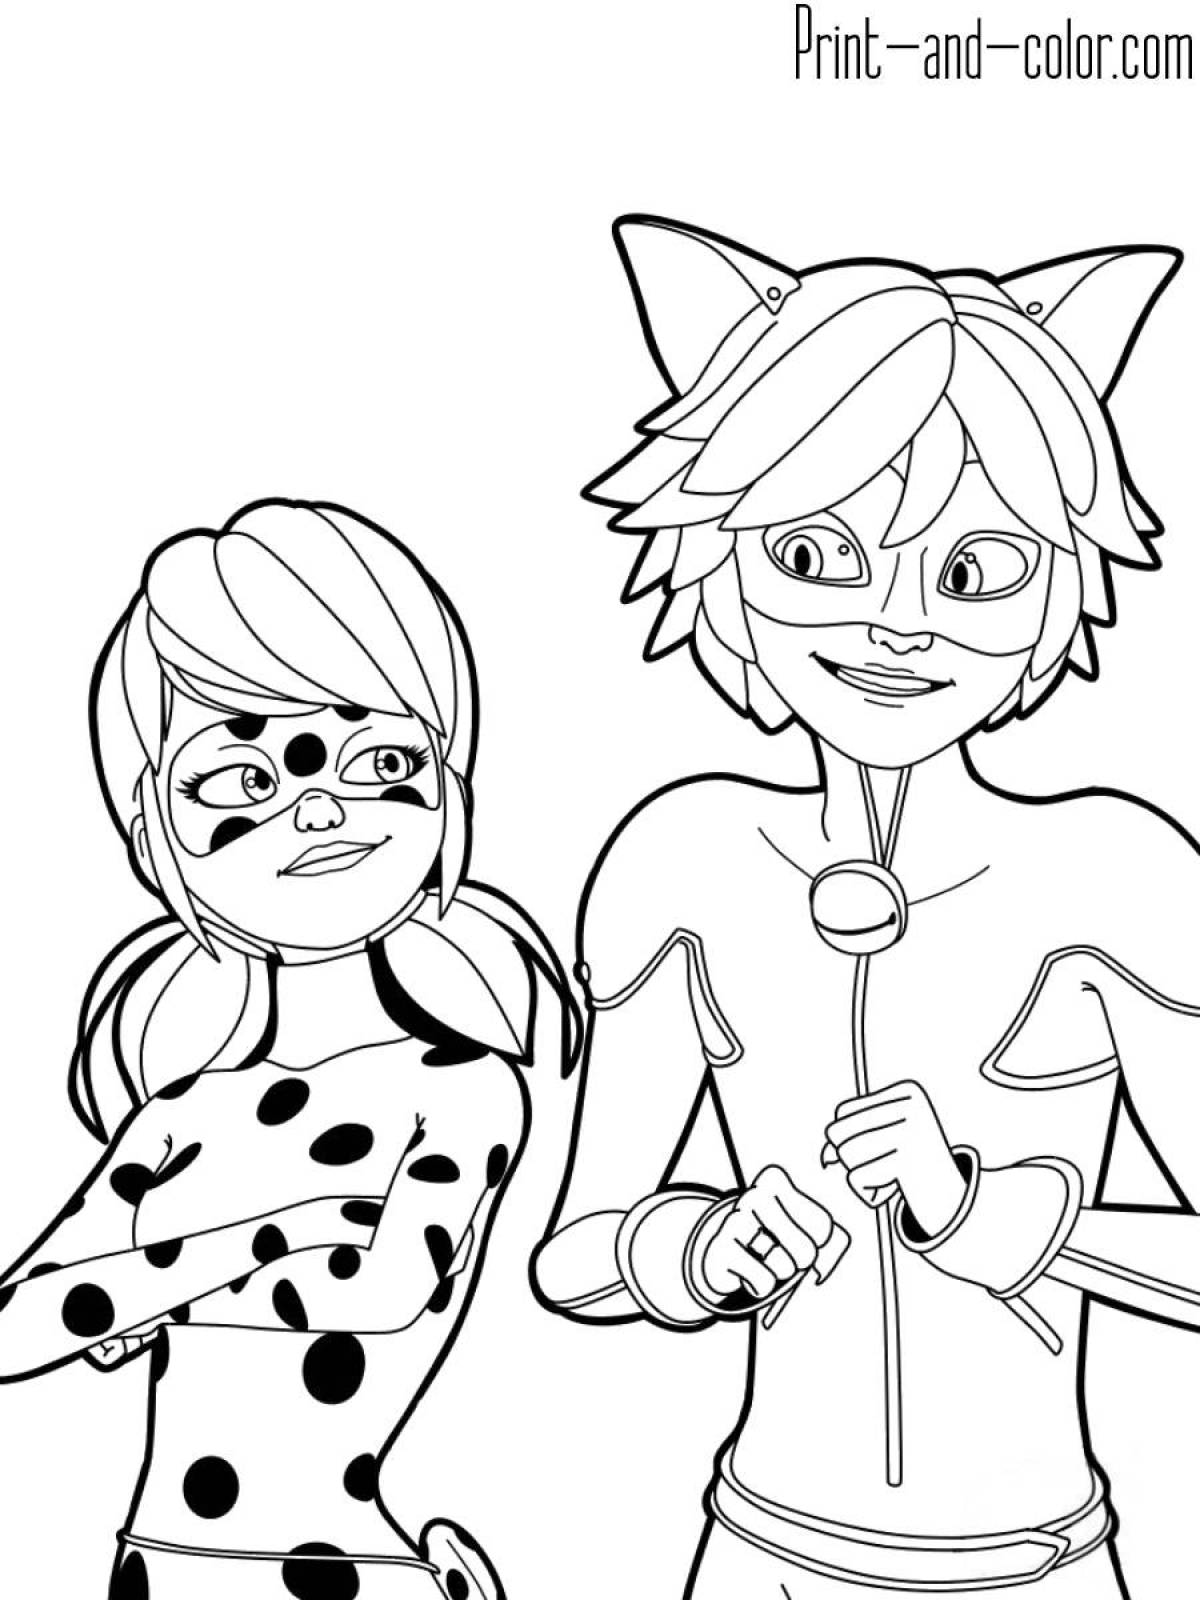 Amazing ladybug and super cat coloring pages for kids